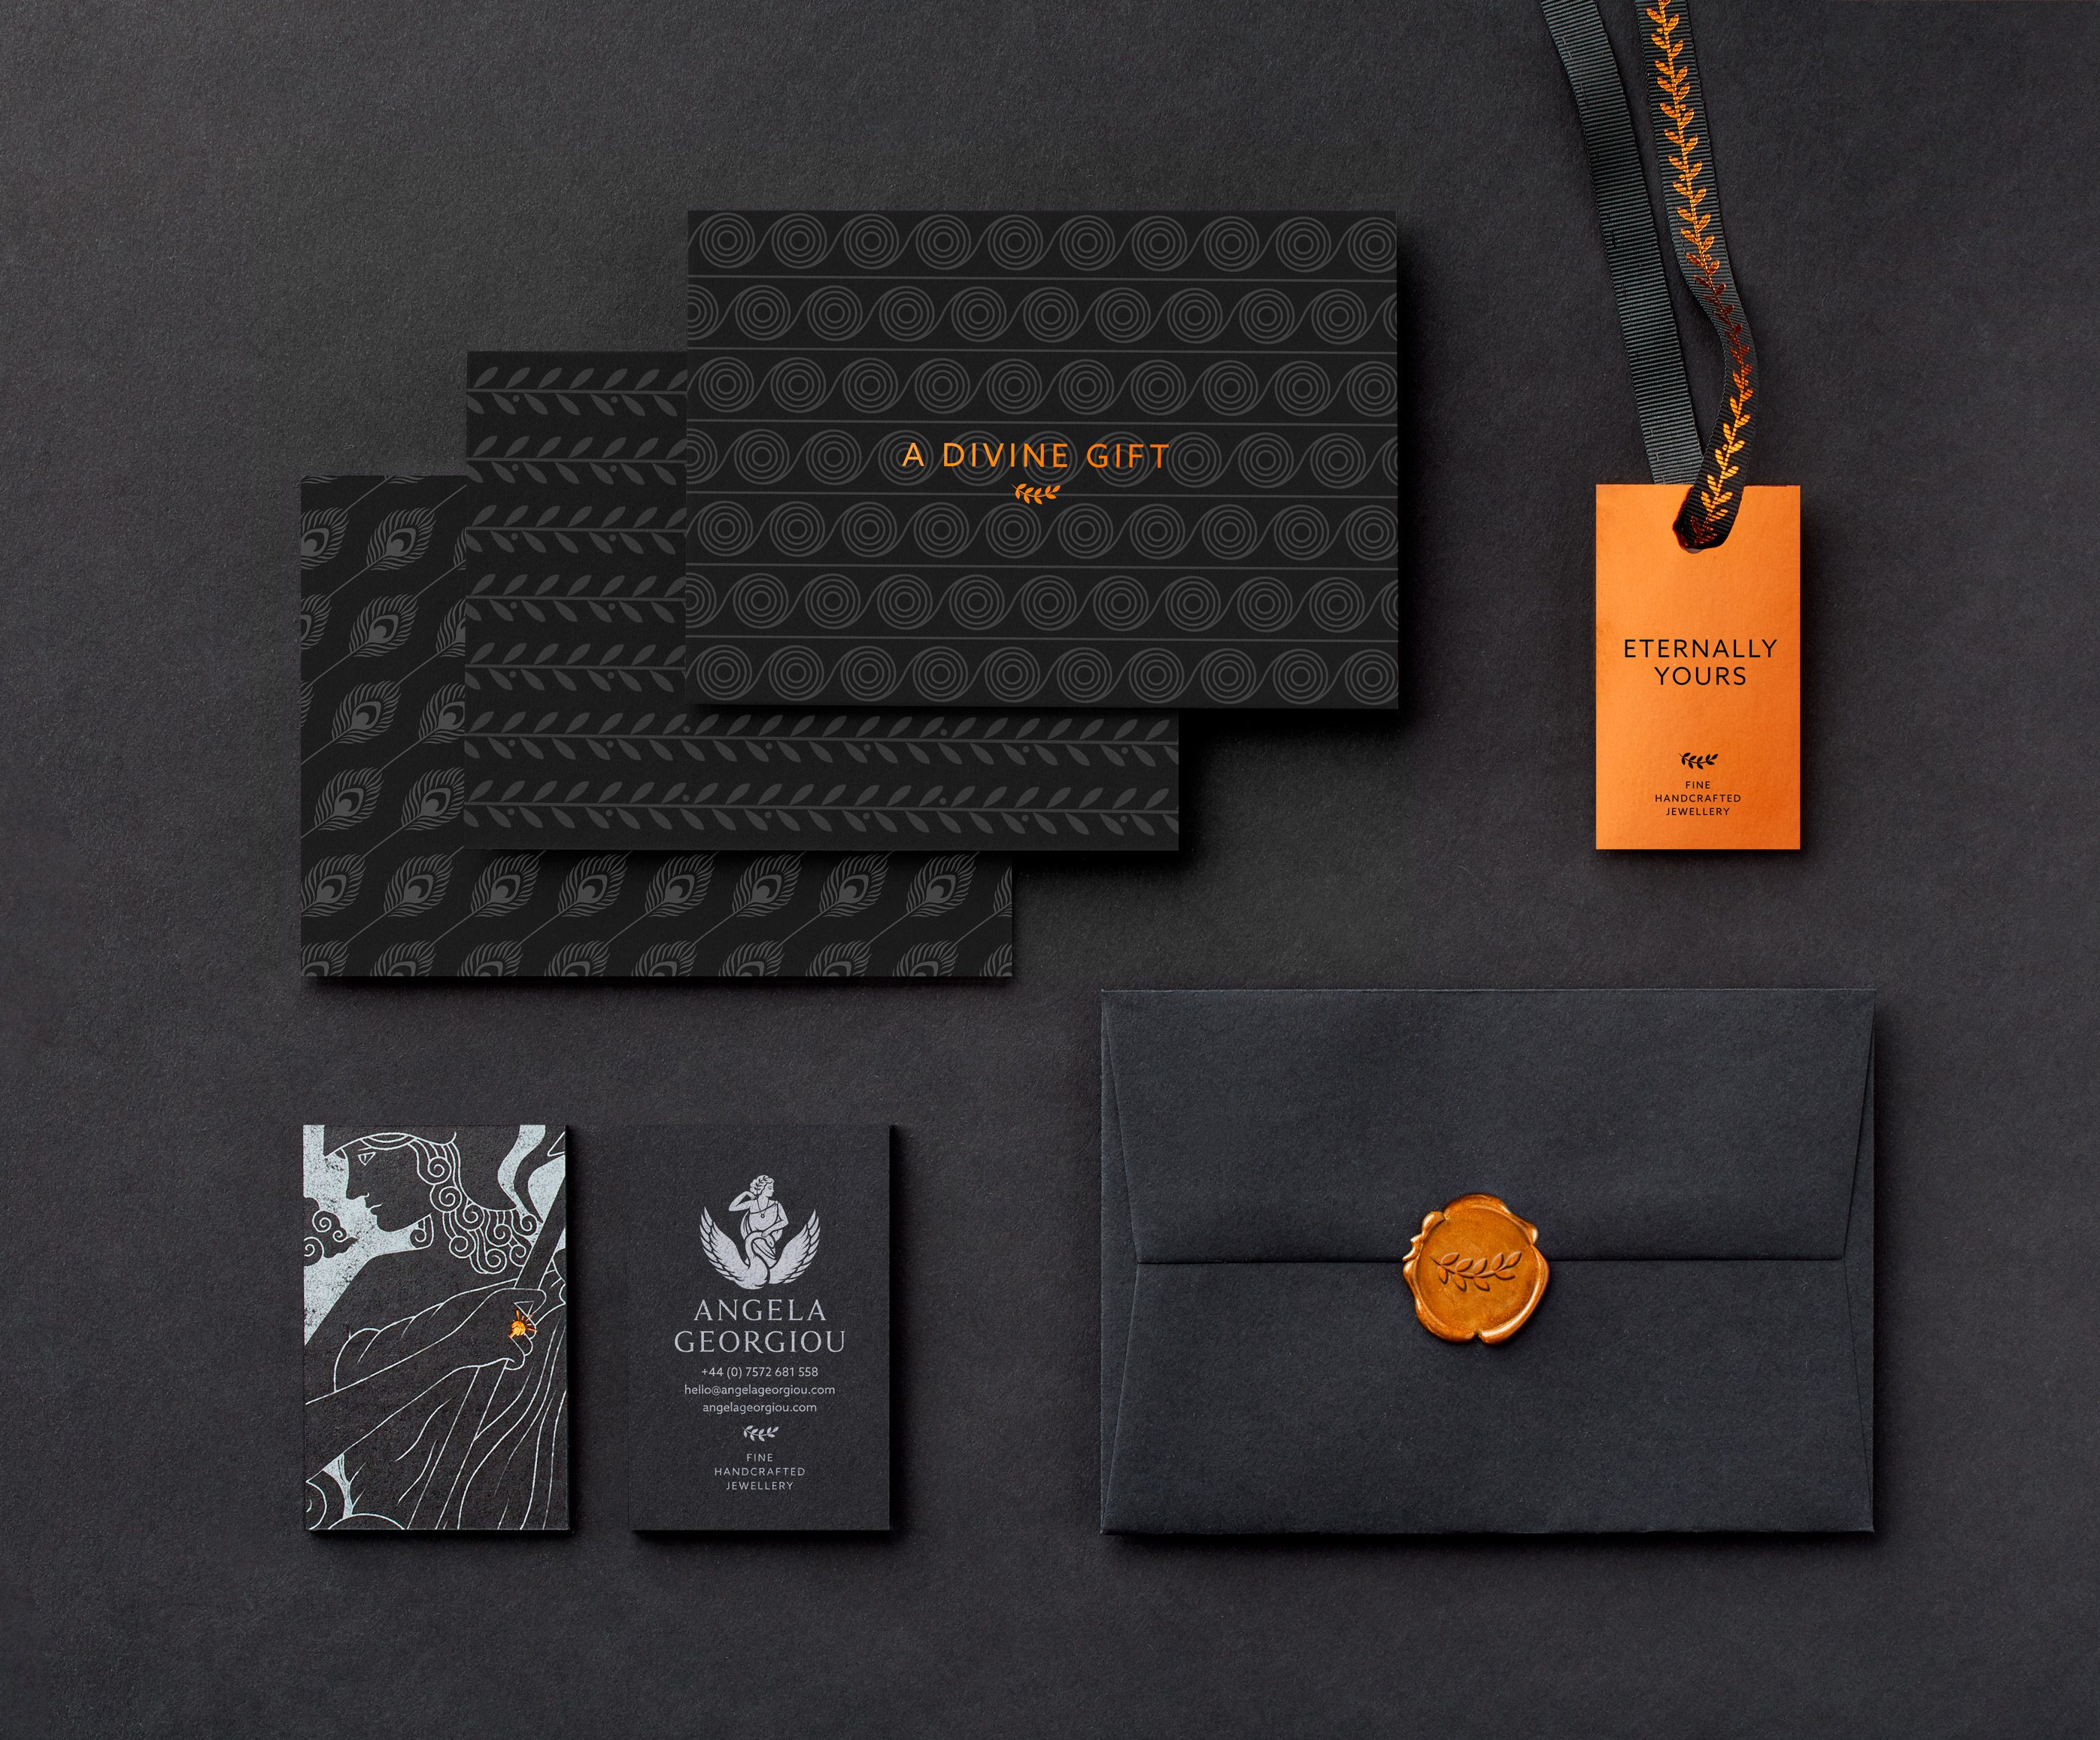 Selection of branded stationery against a dark background including three postcards, business cards, envelope with wax seal and gift label with ribbon